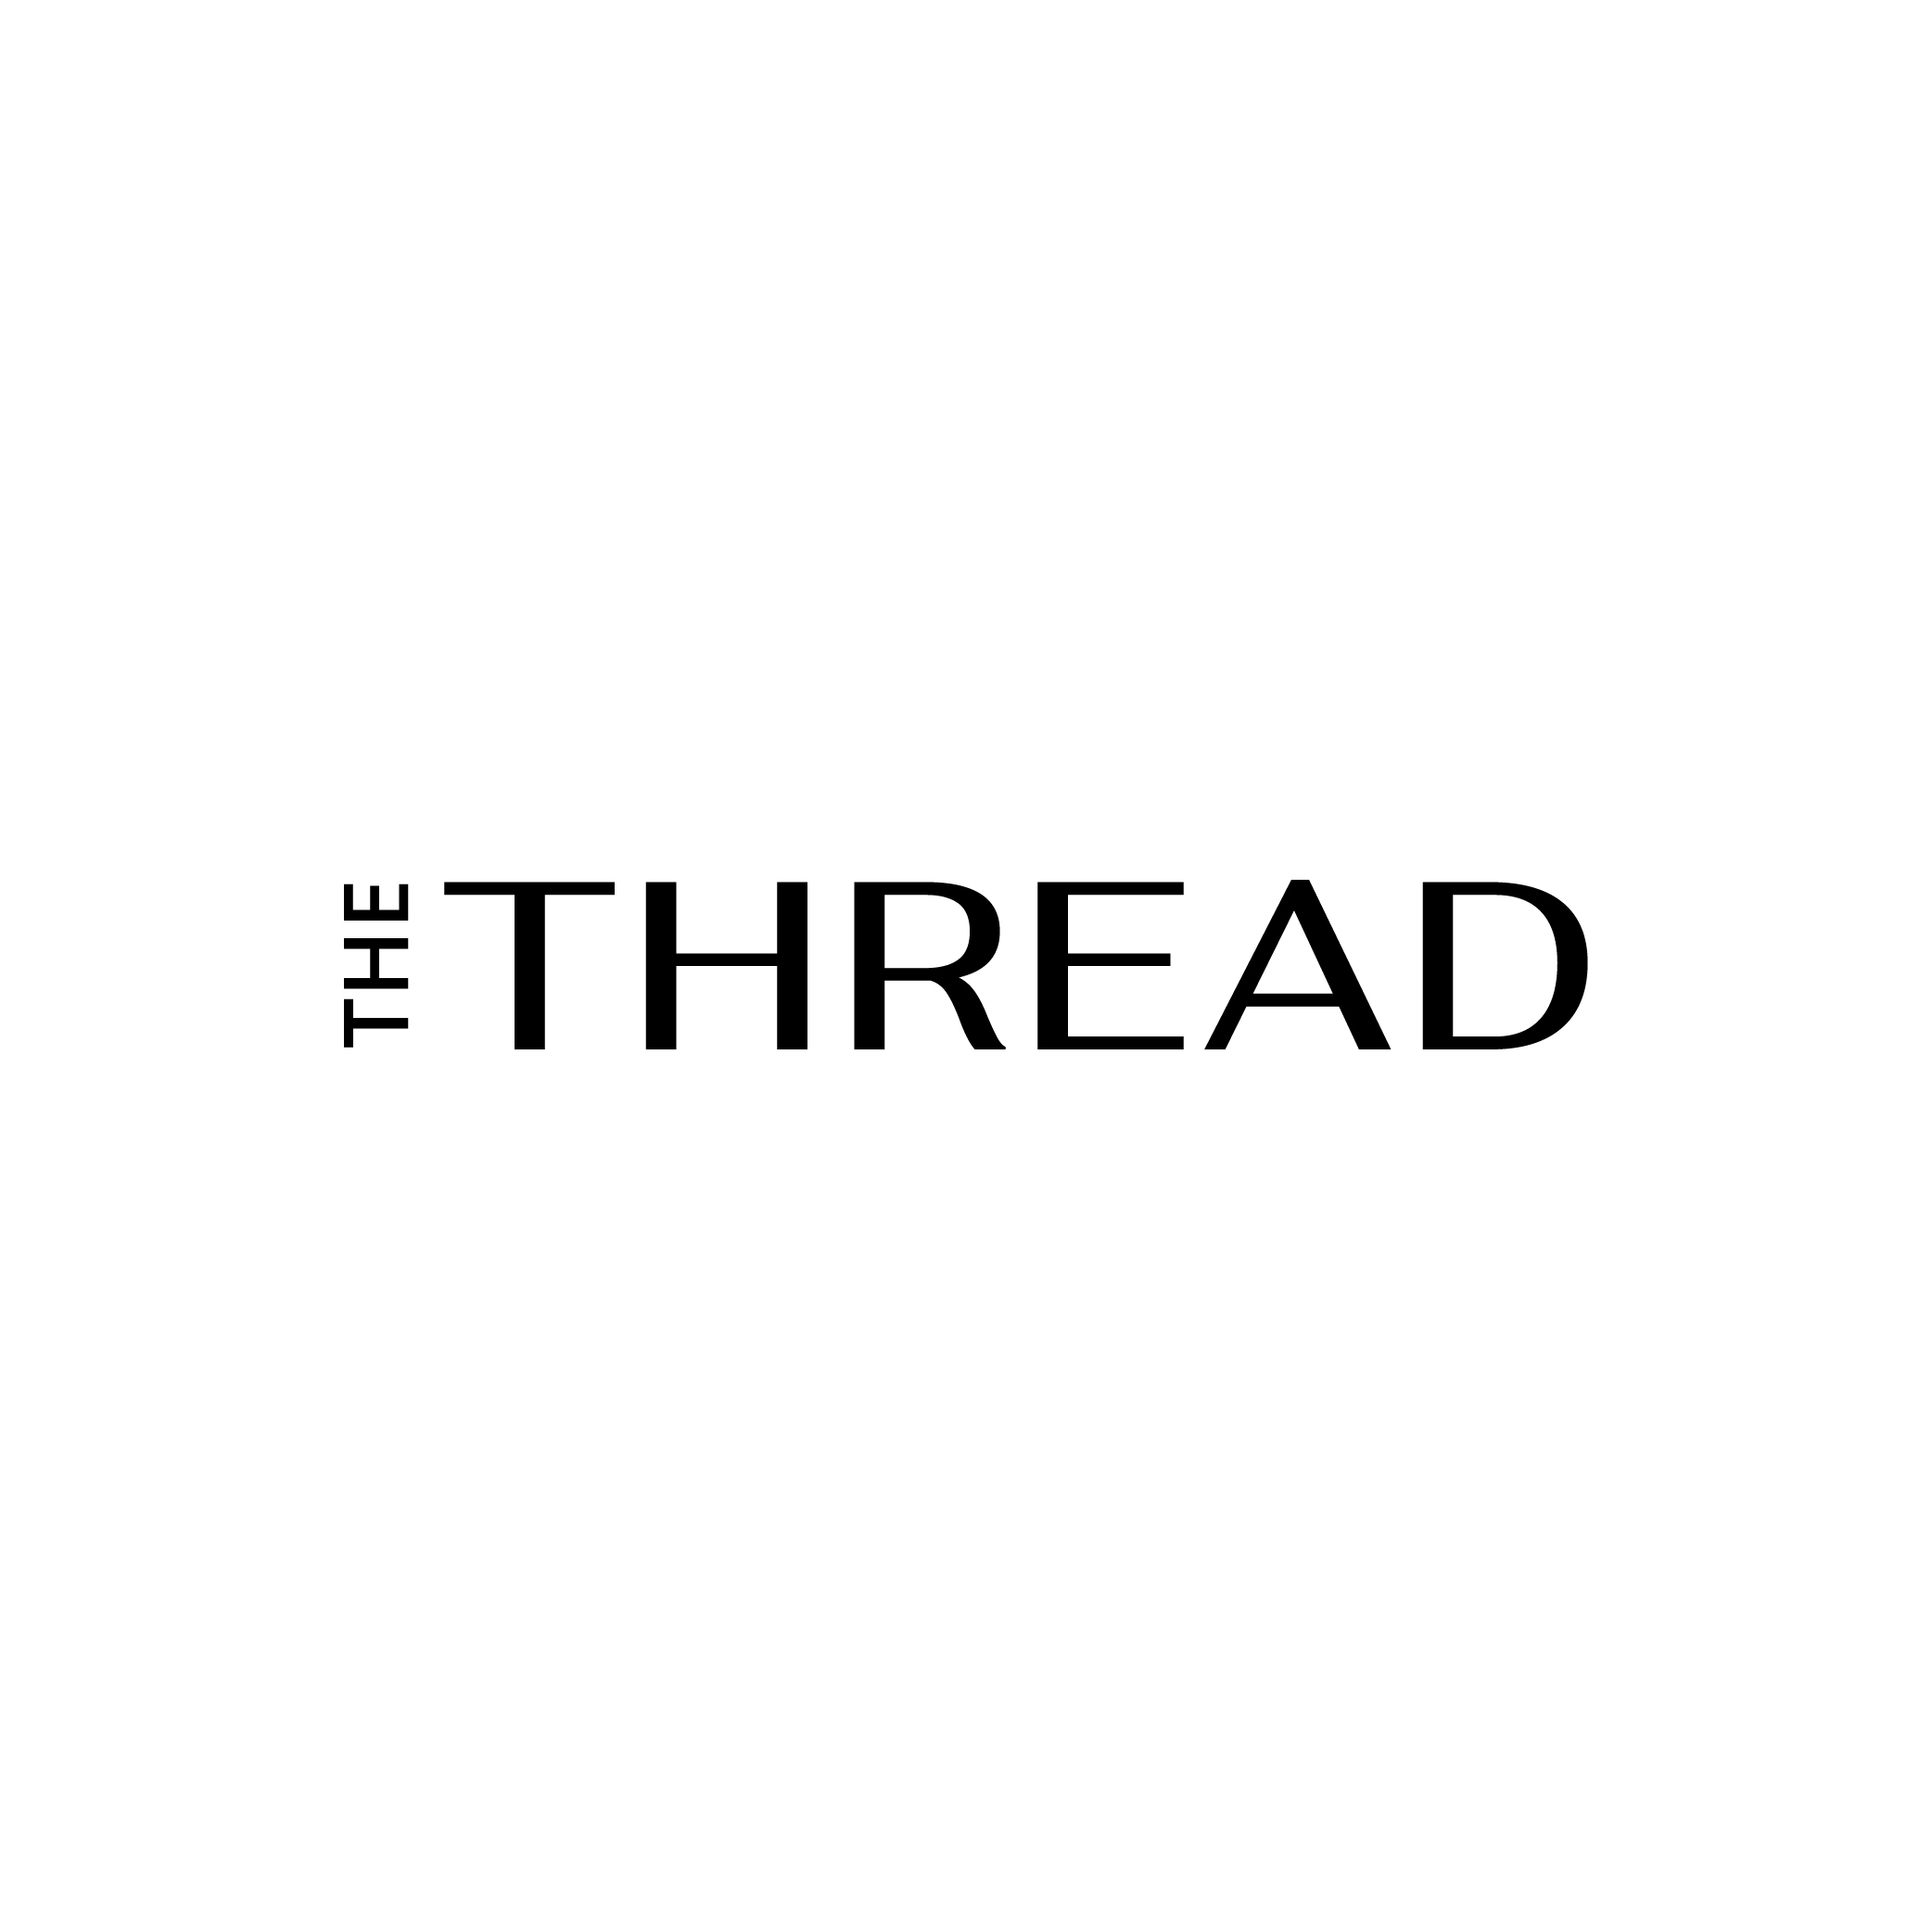 Introducing The Thread: The new online publication on a mission to take up space